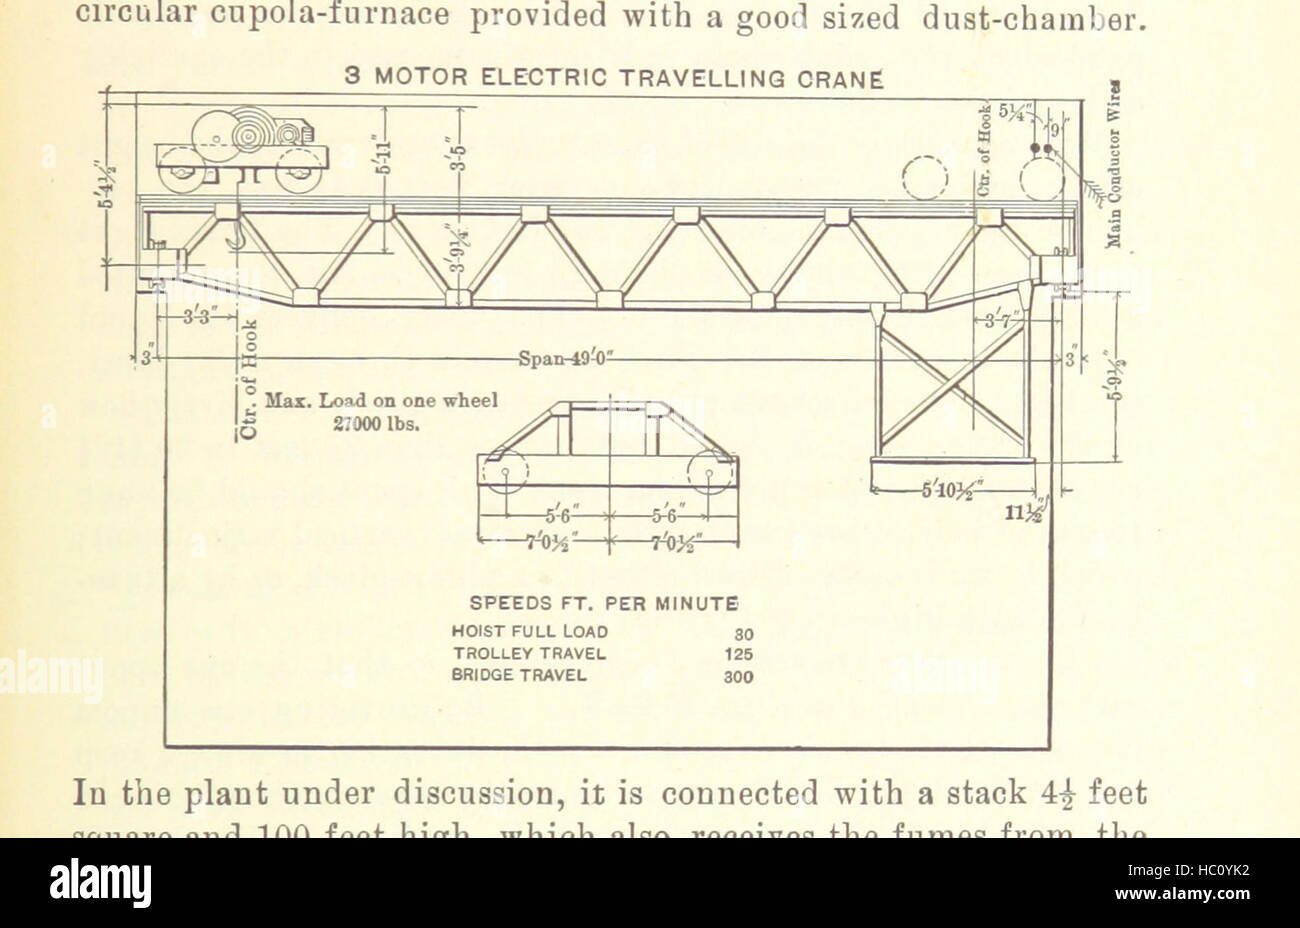 Image taken from page 601 of 'Modern Copper Smelting ... Seventh edition ... enlarged' Image taken from page 601 of 'Modern Copper Smelting Stock Photo